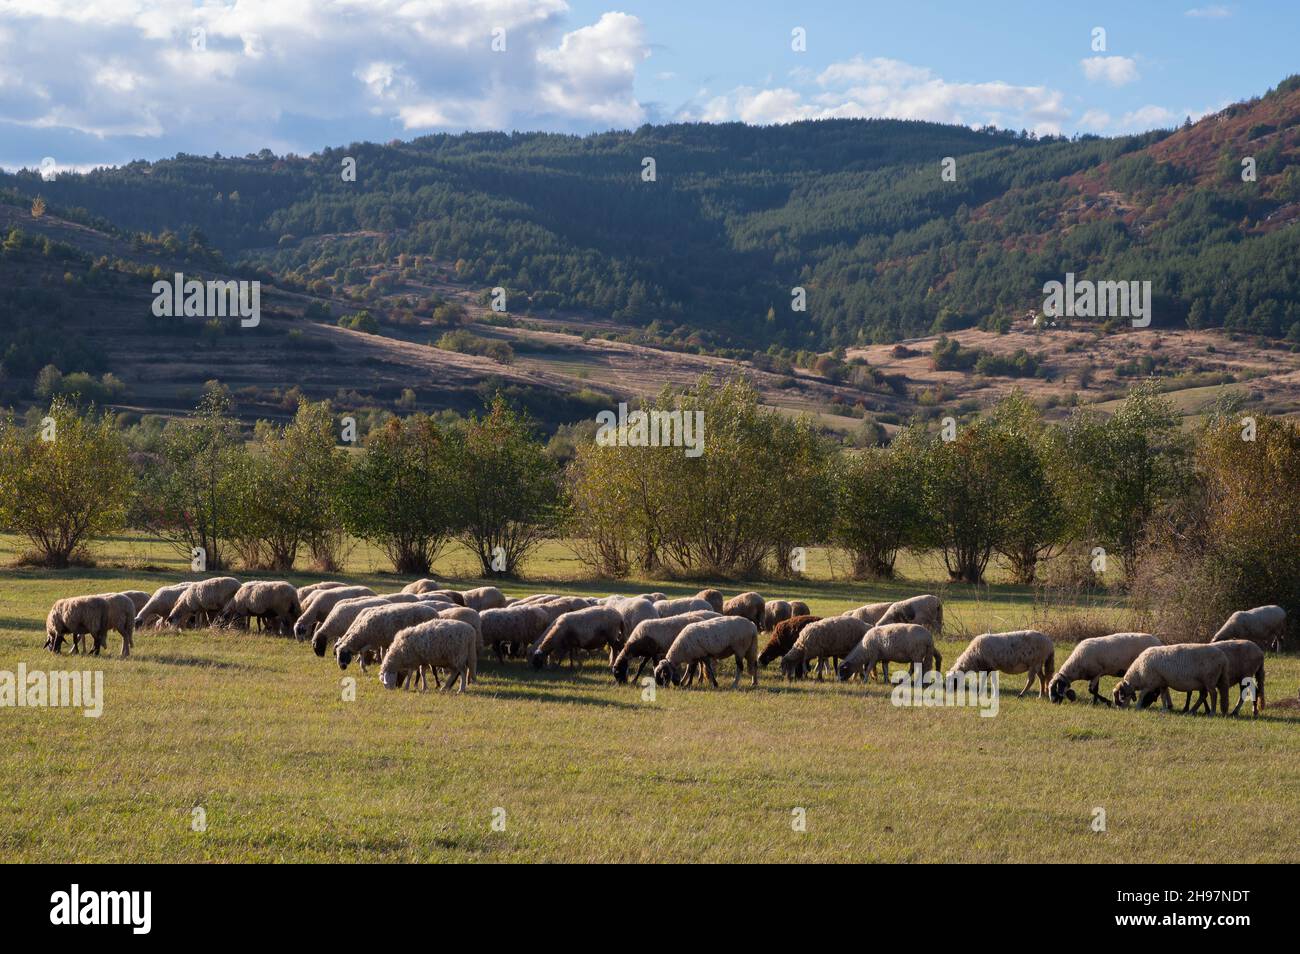 livestock breeding. Sheeps in a meadow in the mountains Stock Photo